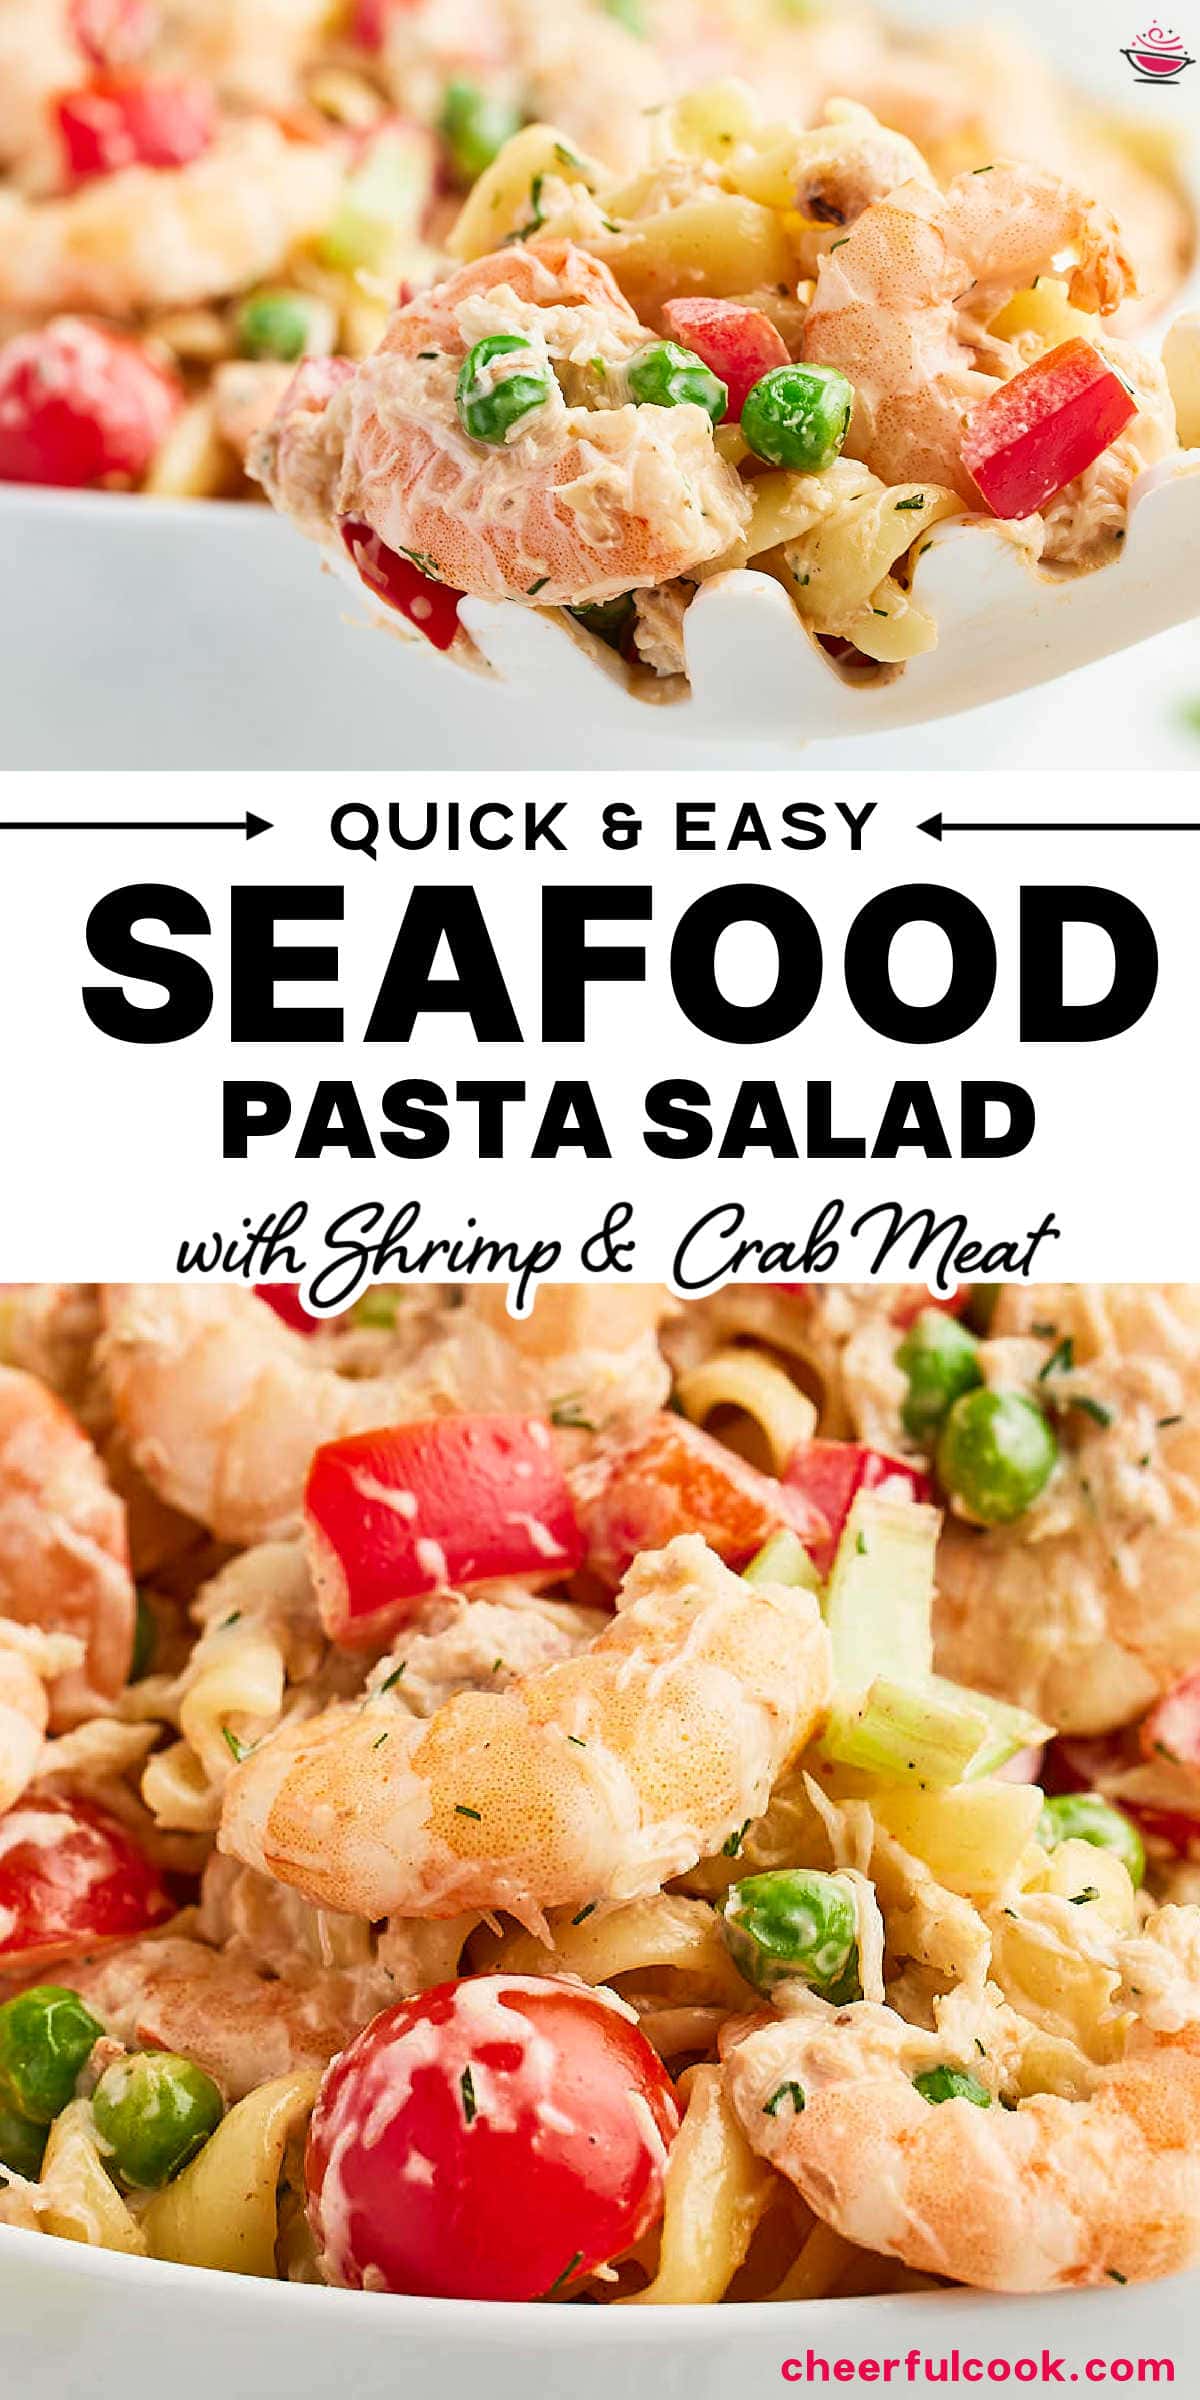 Dive into our crowd-pleasing Seafood Pasta Salad! Loaded with succulent shrimp, juicy crab meat, and fresh, vibrant veggies, it's sure to make your next party a hit. #cherrfulcook #pastaSalad #seafoodpastasalad #shrimp #lumpcrabmeat #easyrecipe via @cheerfulcook